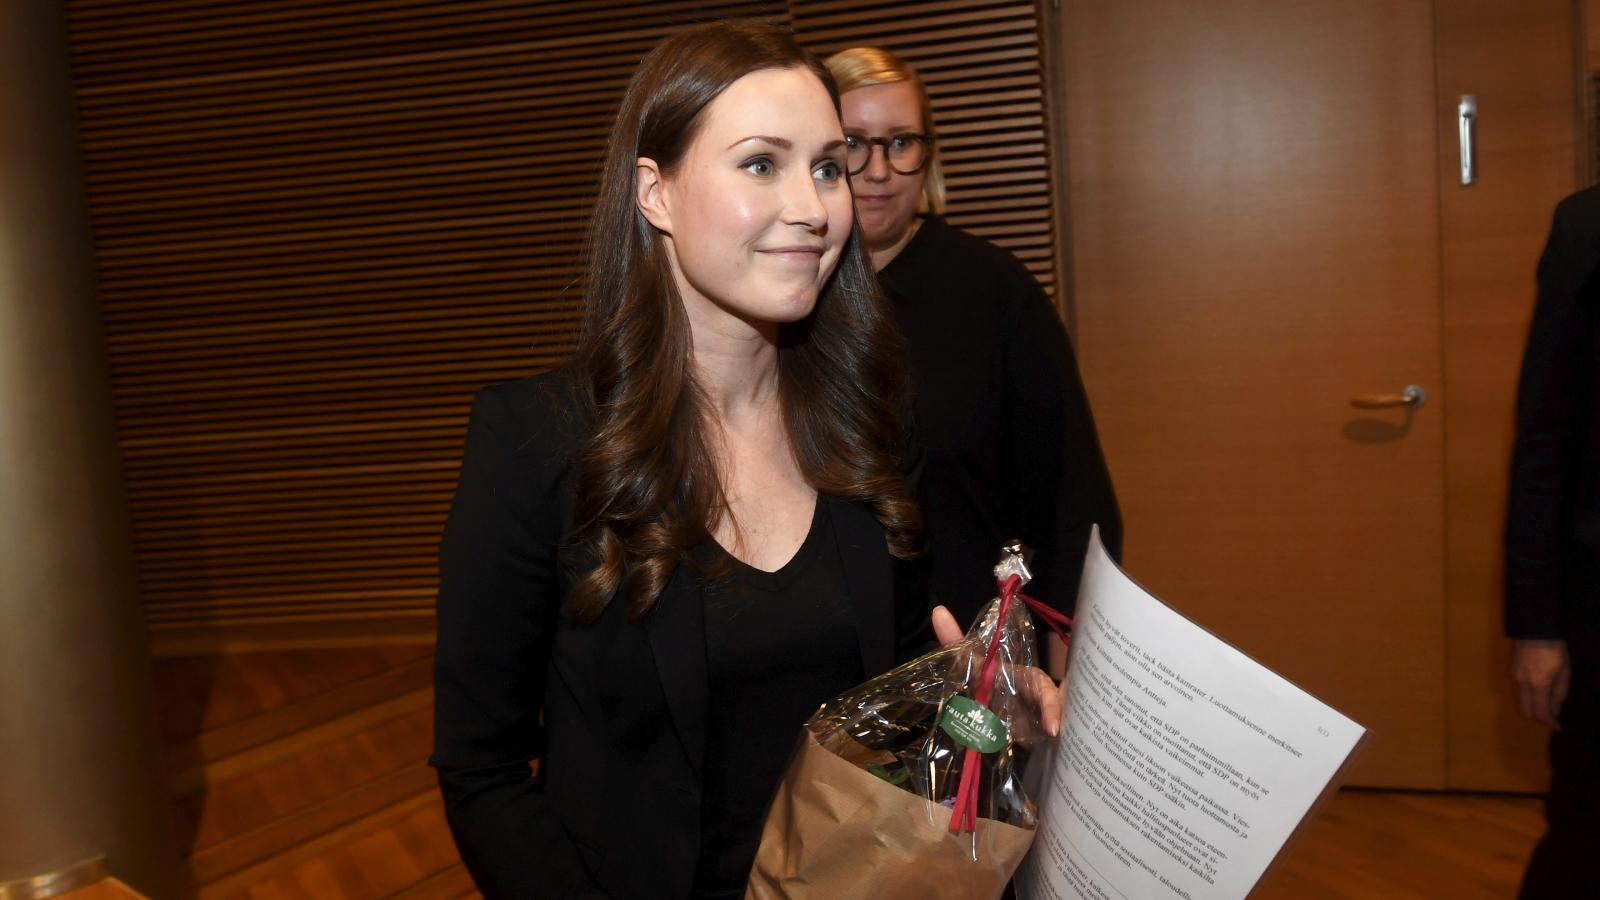 Finland’s Sanna Marin, 34, becomes world youngest-serving prime minister